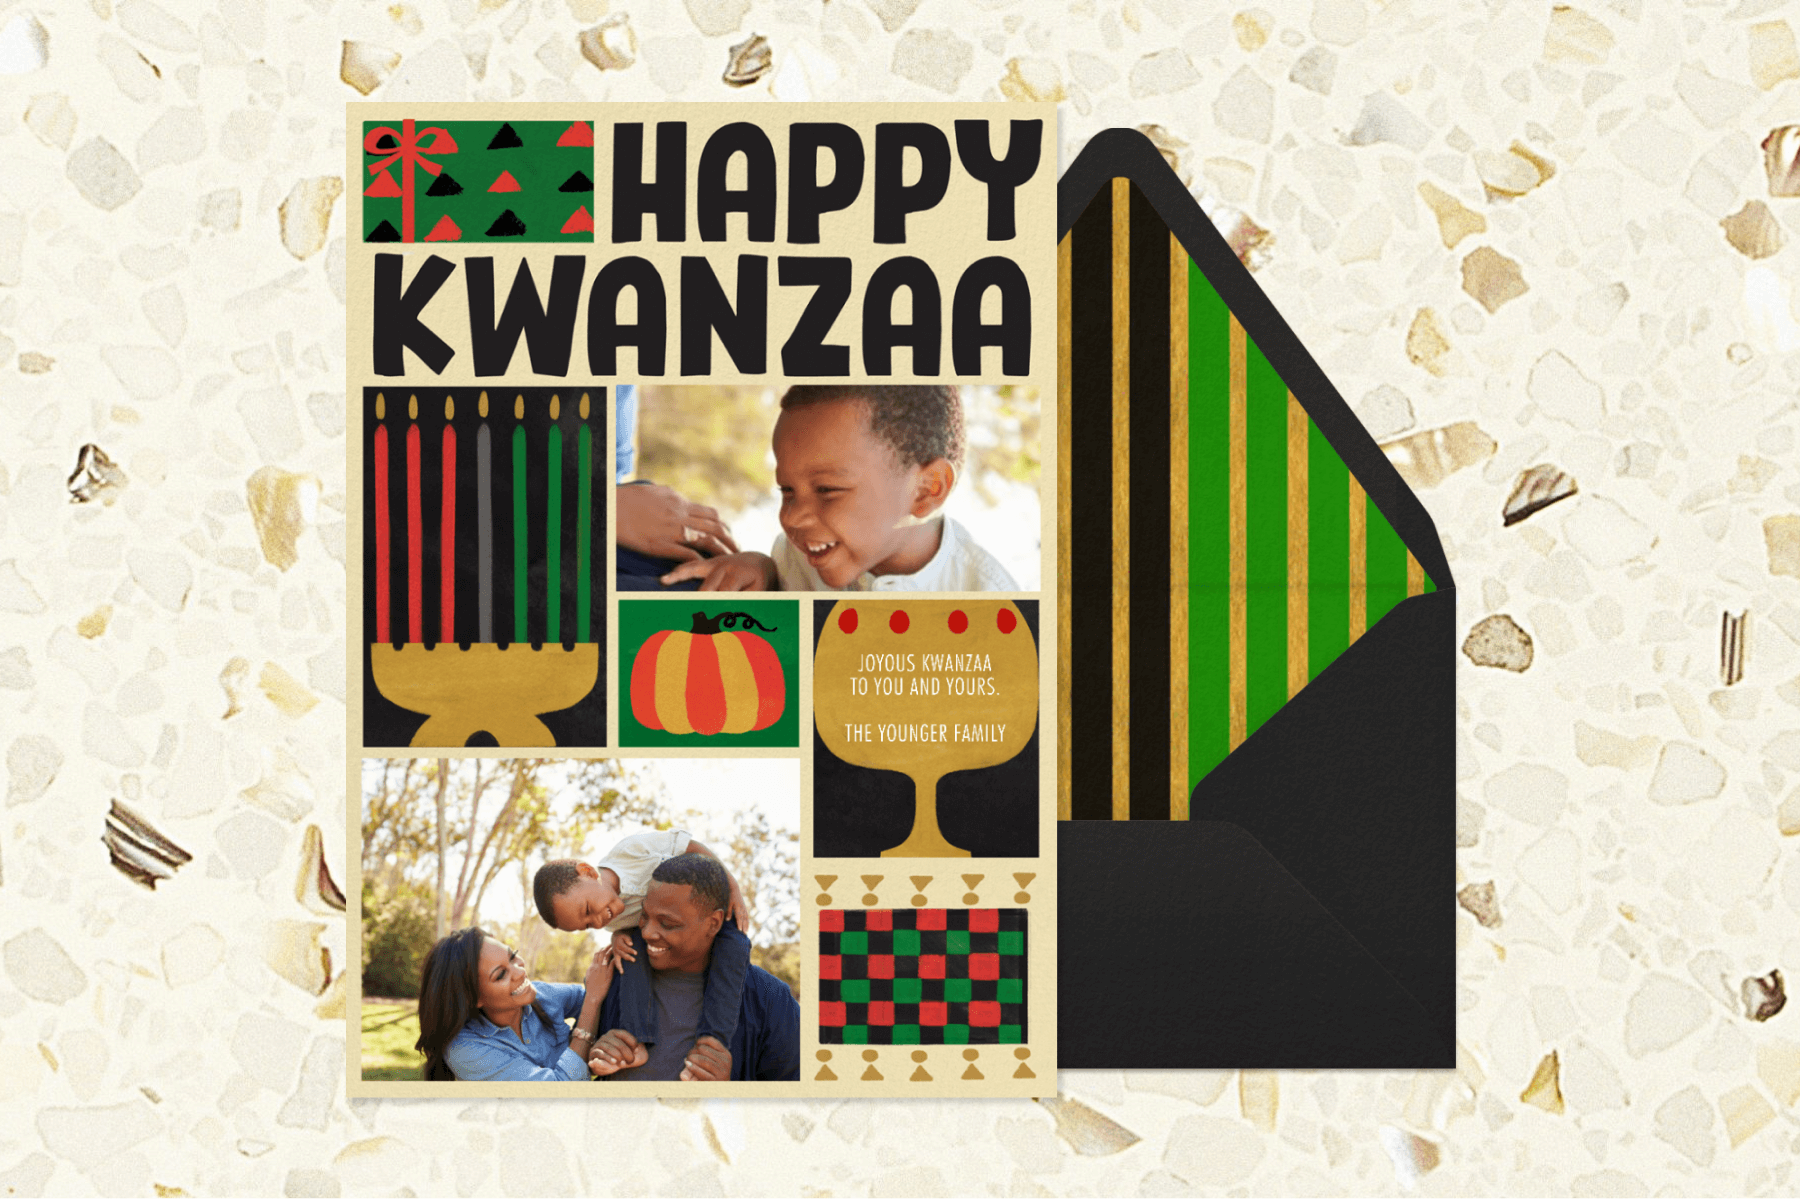 A Kwanzaa card with colorful illustrations of a kinara, a gift, and photos of a young family beside a black envelope with a green, gold, and black striped liner.